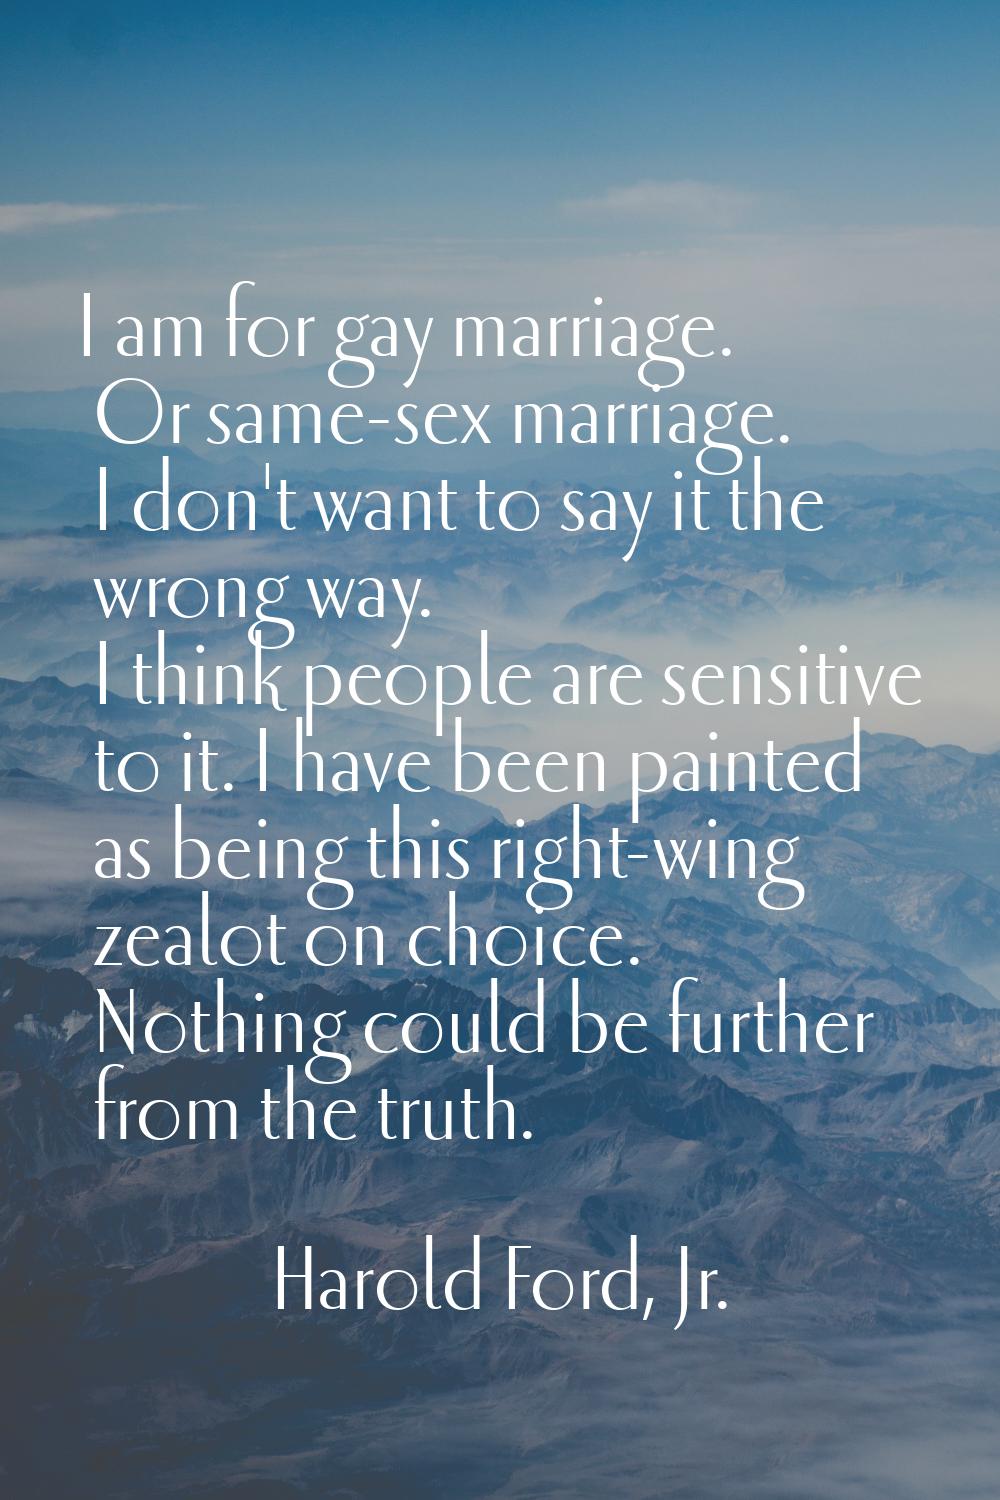 I am for gay marriage. Or same-sex marriage. I don't want to say it the wrong way. I think people a